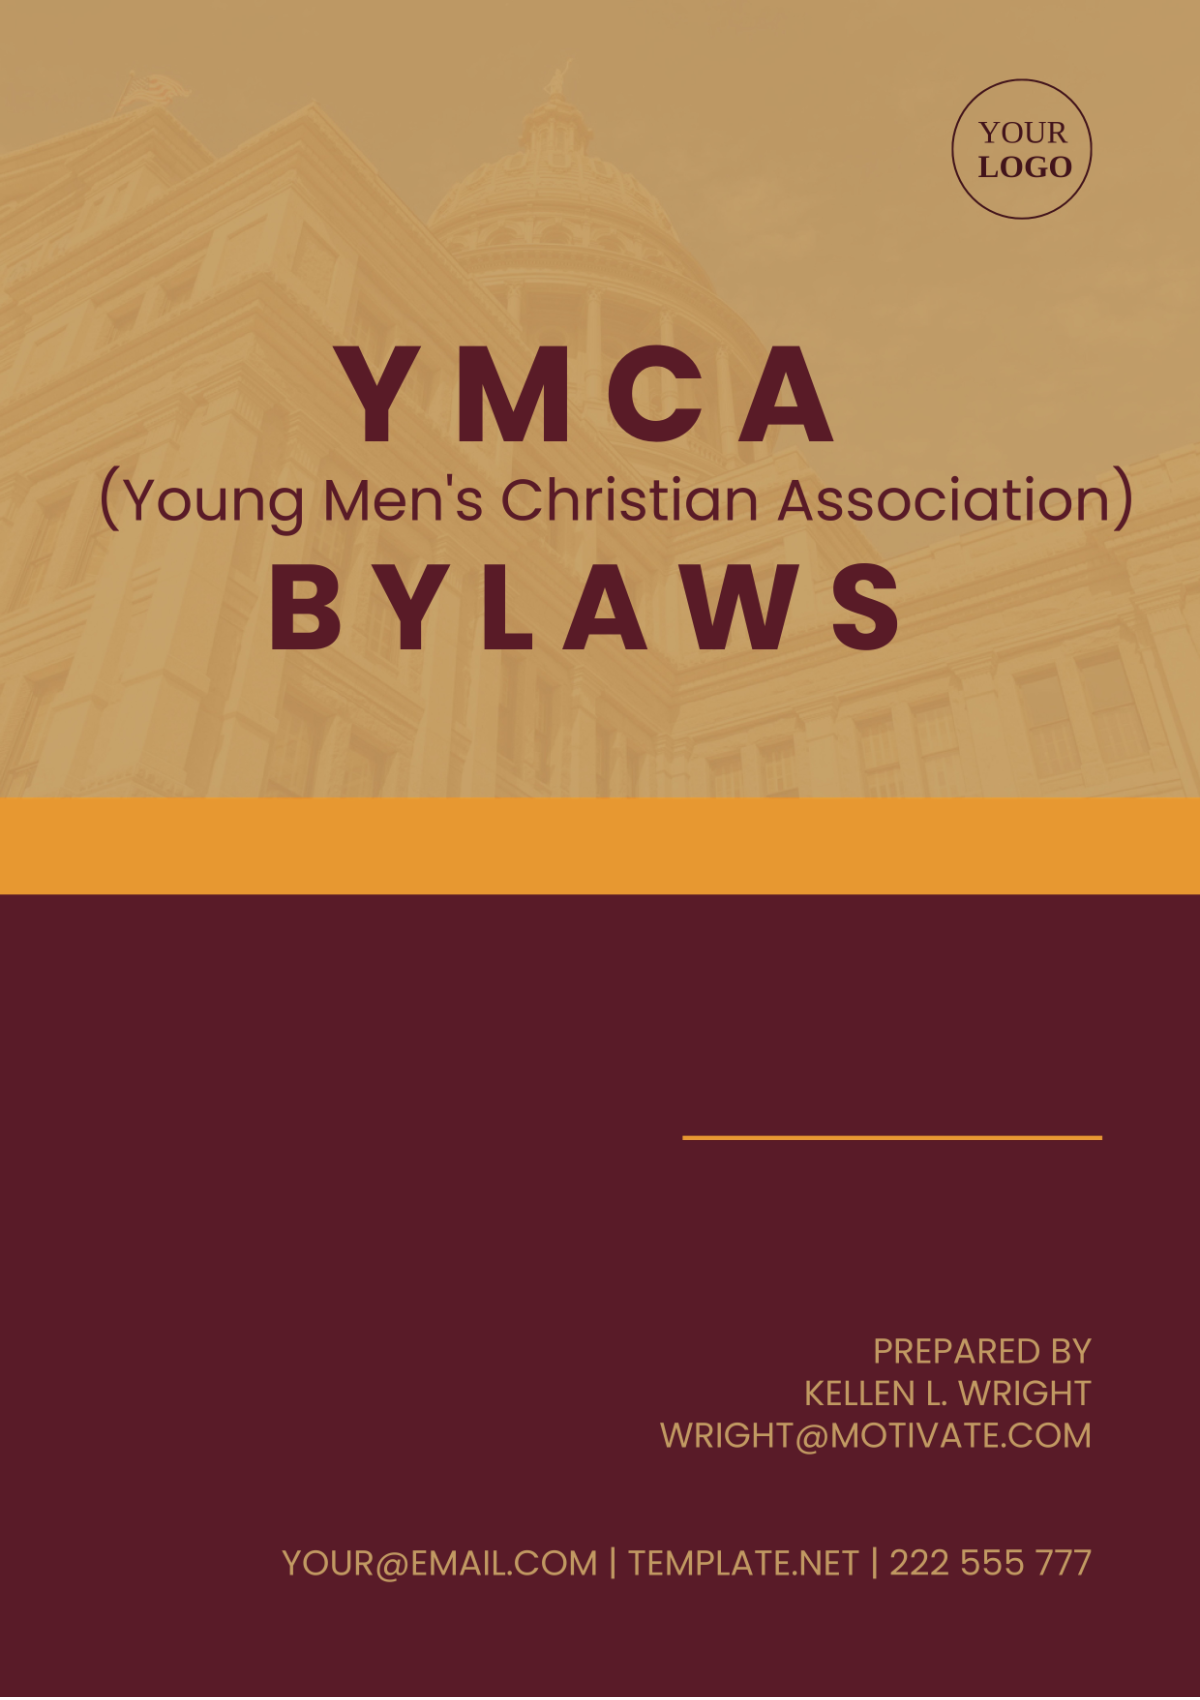 Free Ymca(Young Men's Christian Association) Bylaws Template